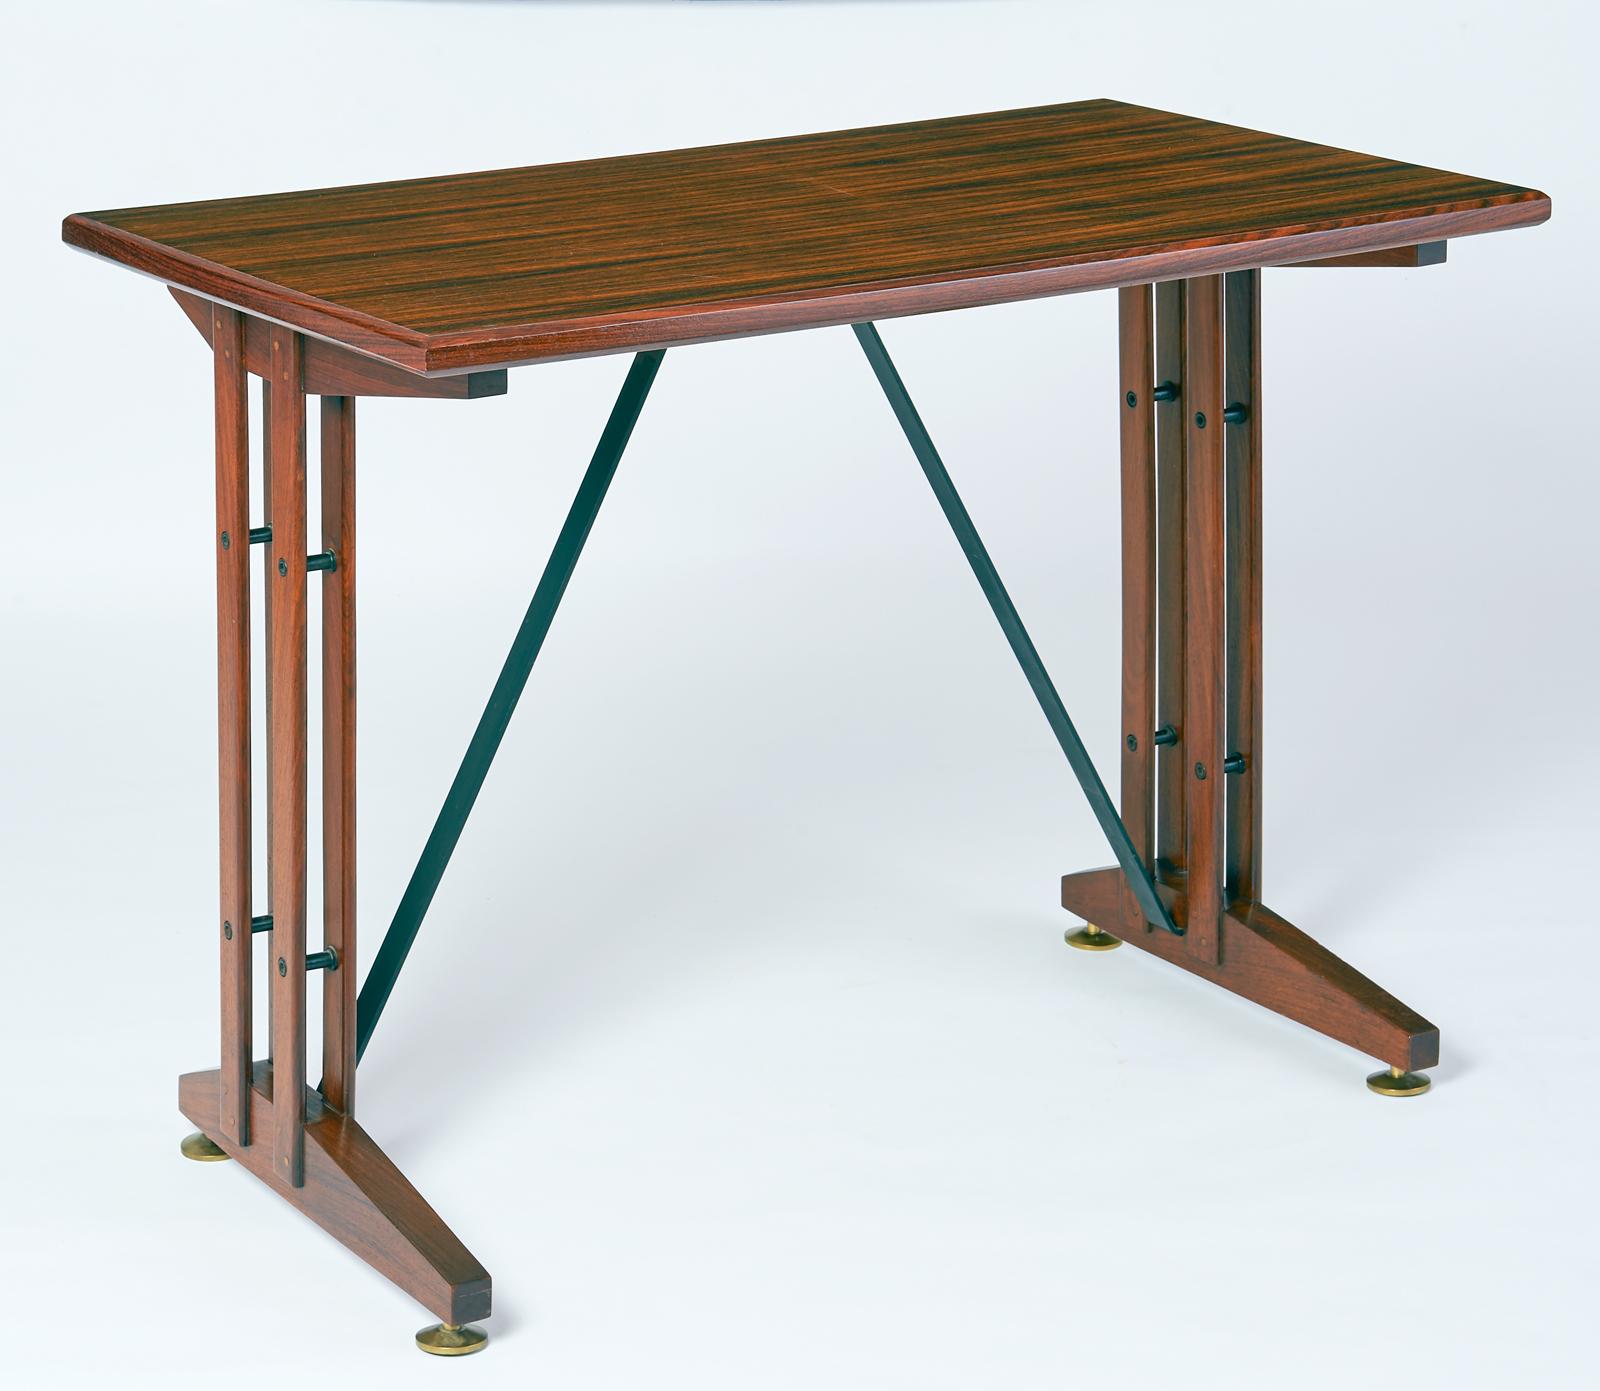 An elegant and compact writing or laptop  table, in polished wood with black iron stretchers and bronze adjusting feet. The perfect setting for a laptop,
Italy, 1950s
Dimensions: 39 x 22 x 30 H.